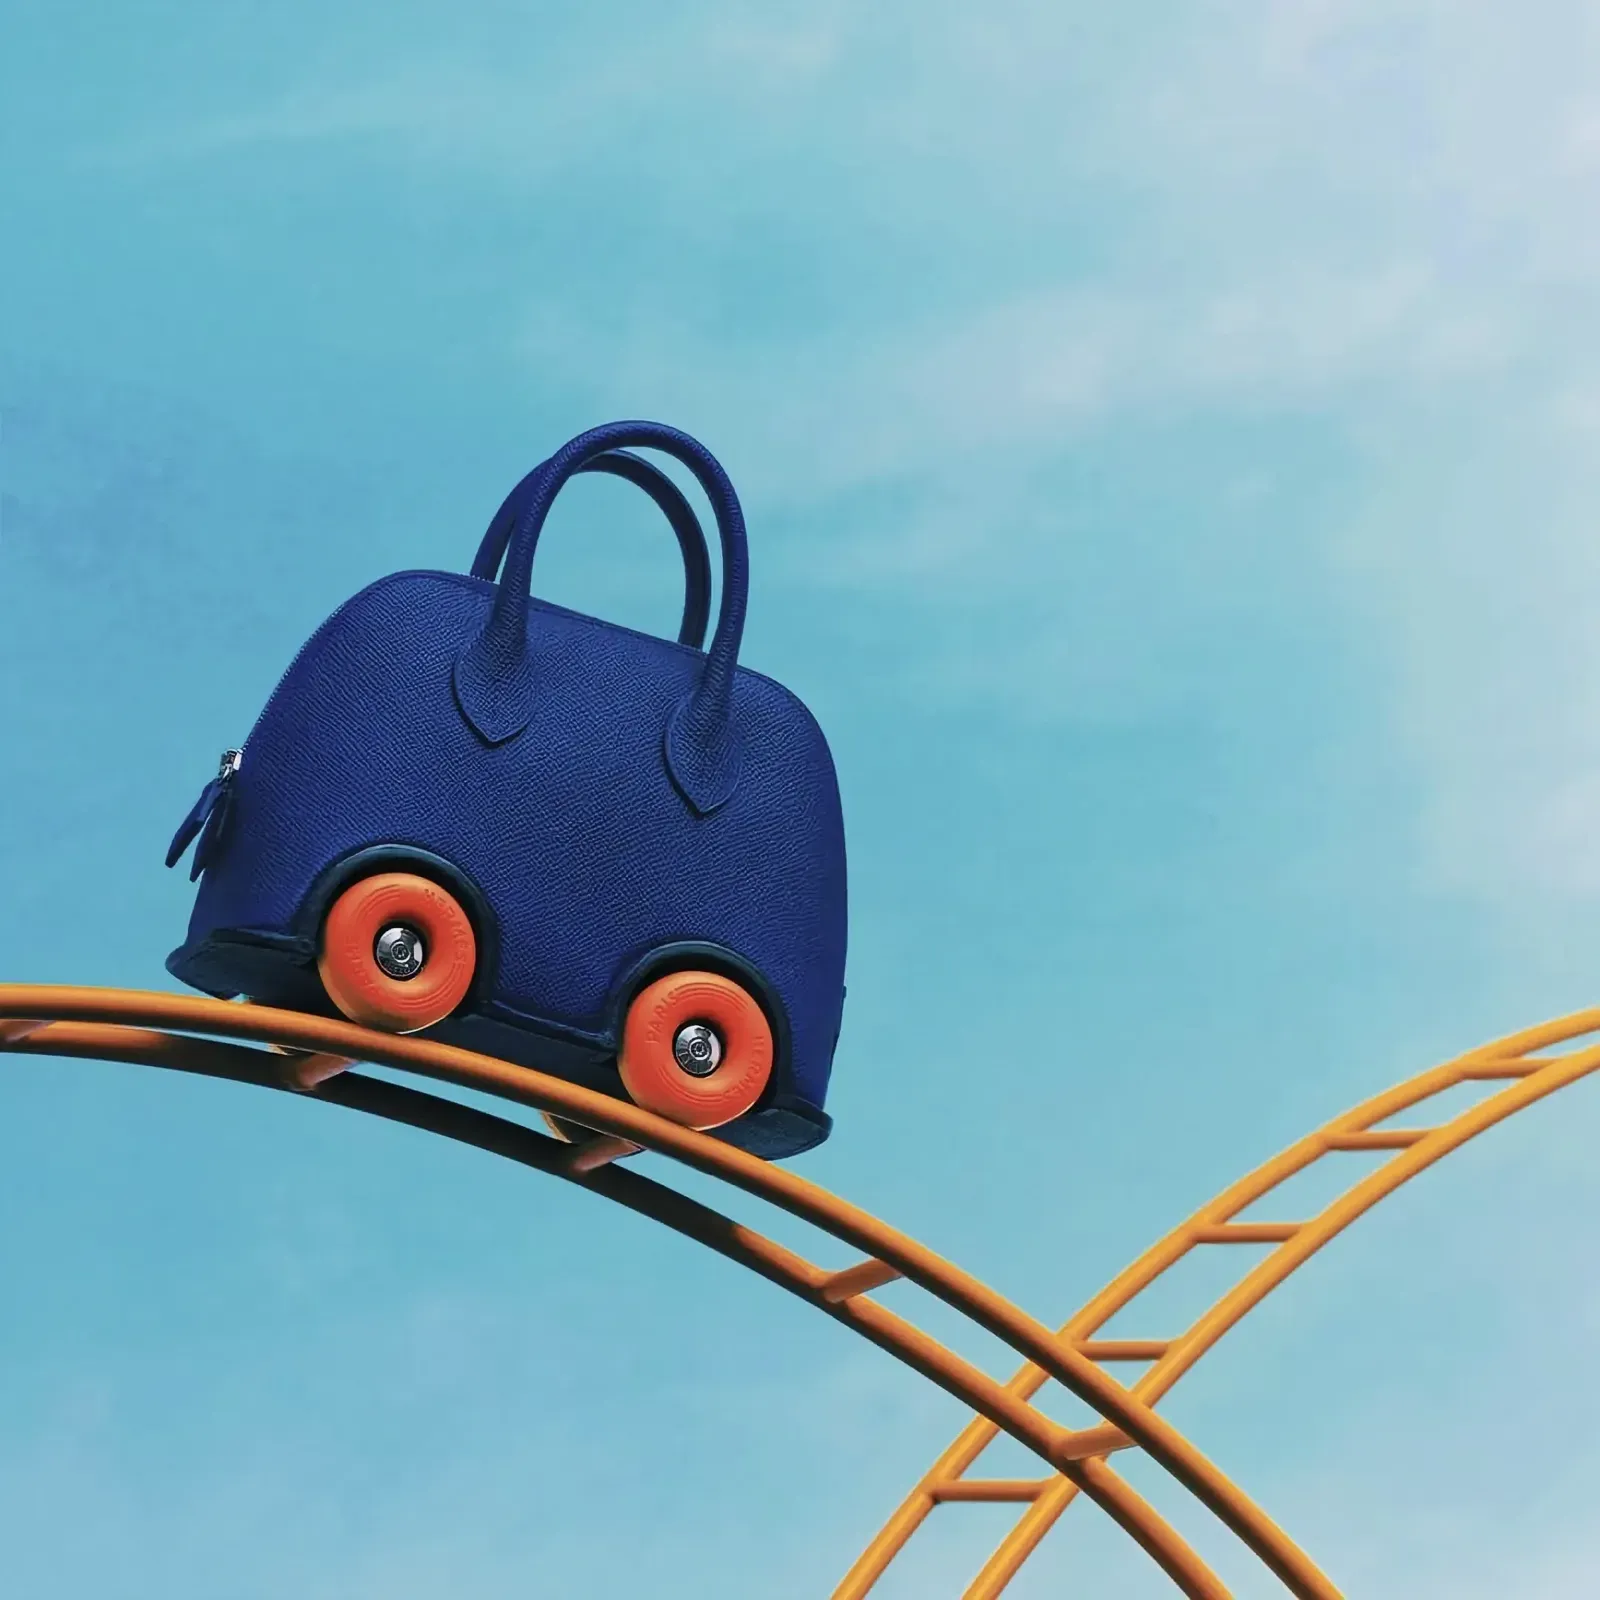 Vibrant scene featuring a blue bag on a roller coaster